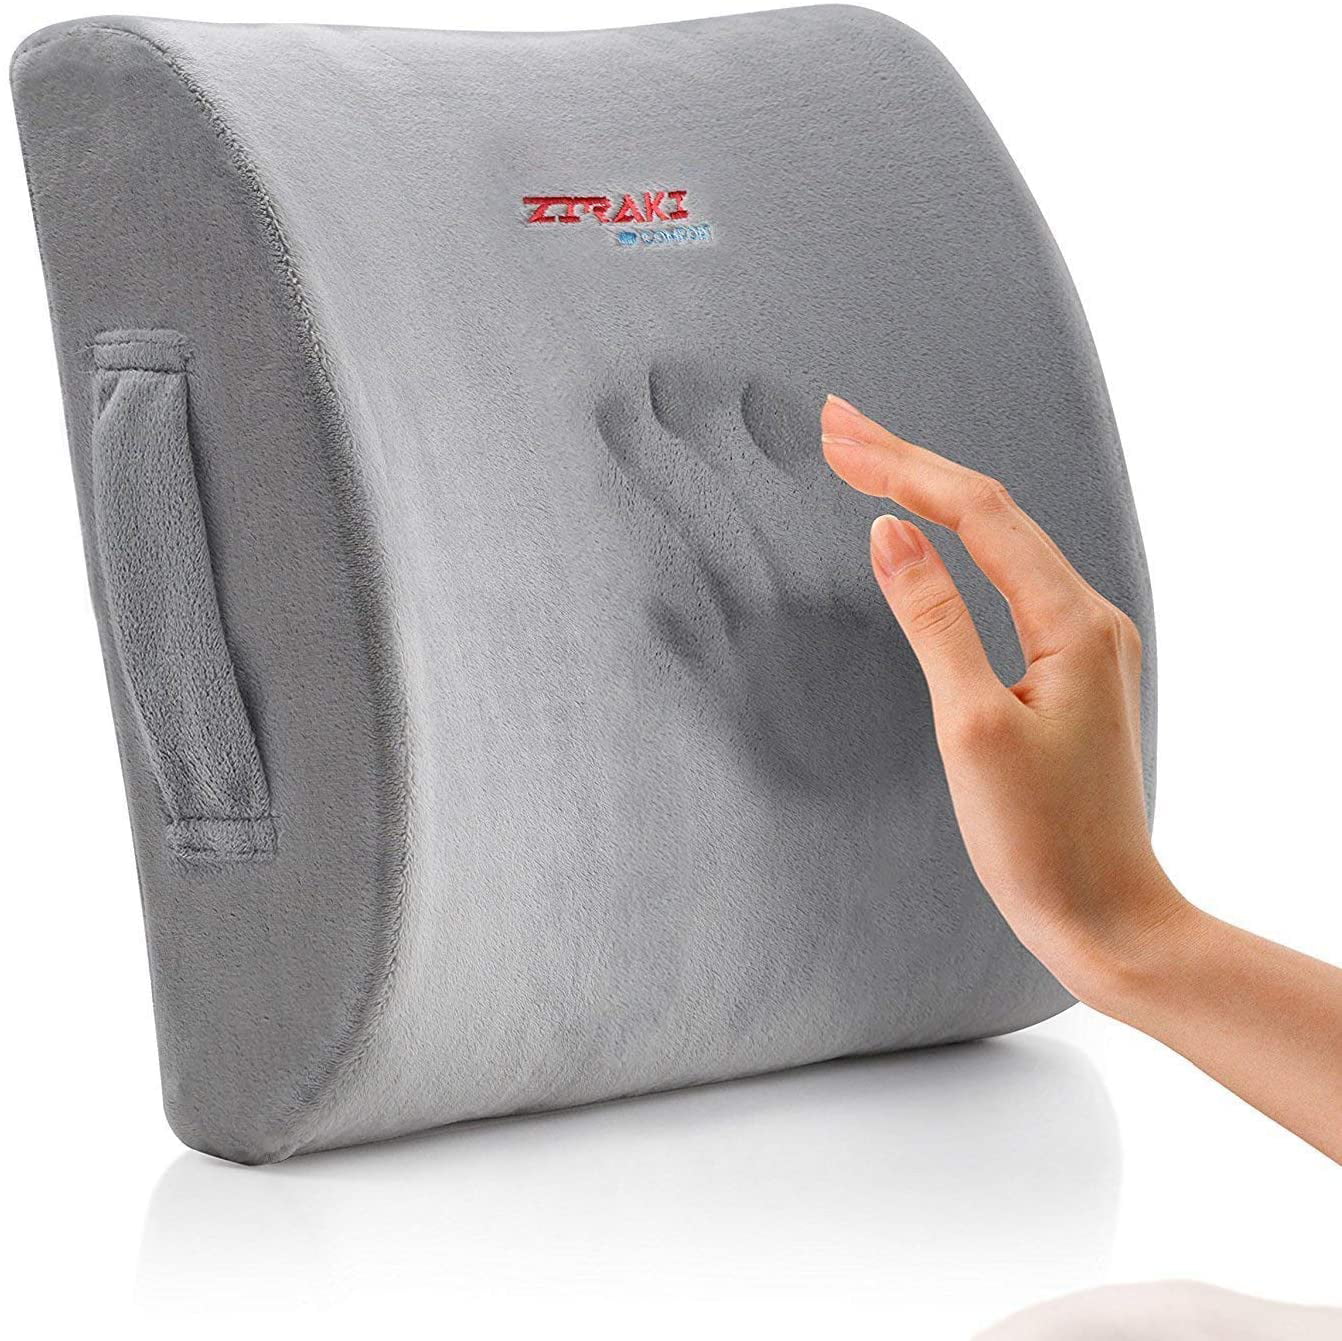 Lumbar Pillow Back Pain Support - Seat Cushion For Car or Office